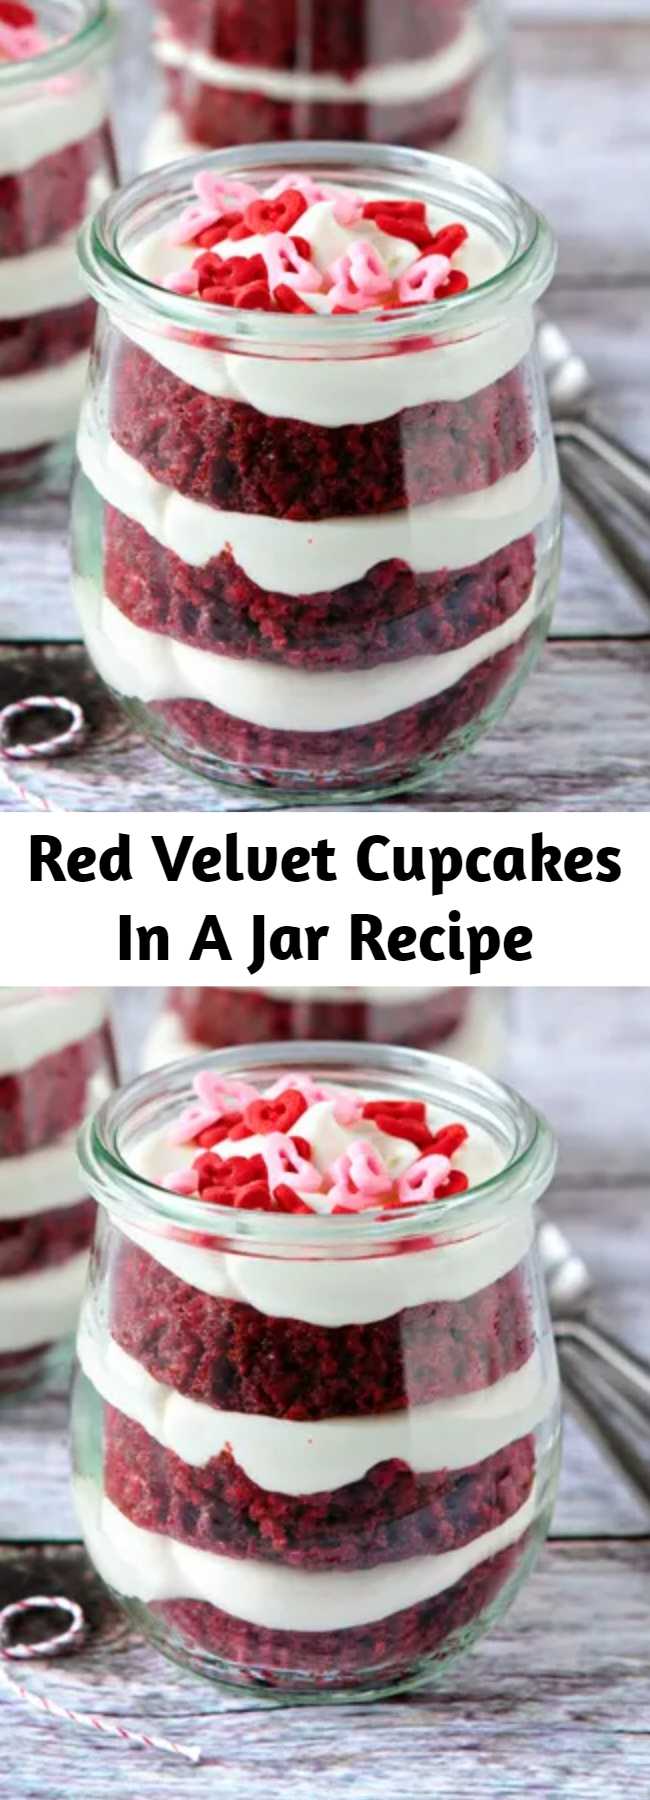 Red Velvet Cupcakes In A Jar Recipe - It’s adapted from the New York Times, and in my opinion, is one of the best Red Velvet recipes out there. Whether you’re baking for 8-year olds or your sweetheart, I’m fairly certain that just about anyone will fall head over heels for Red Velvet Cupcakes in a Jar.